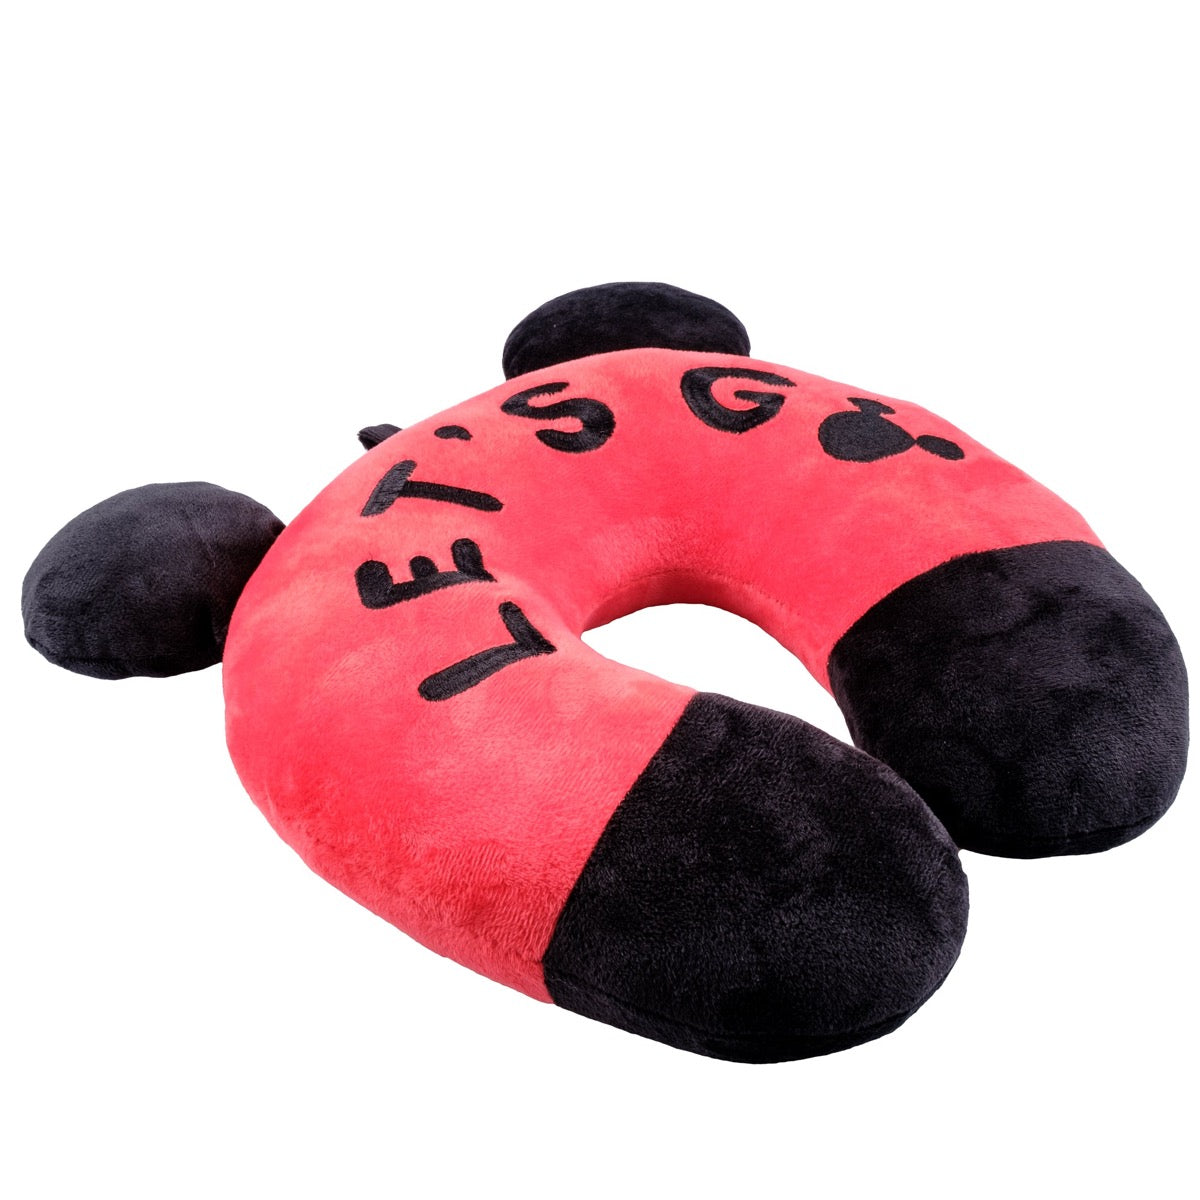 Disney Mickey Mouse let's go travel neck pillow red black